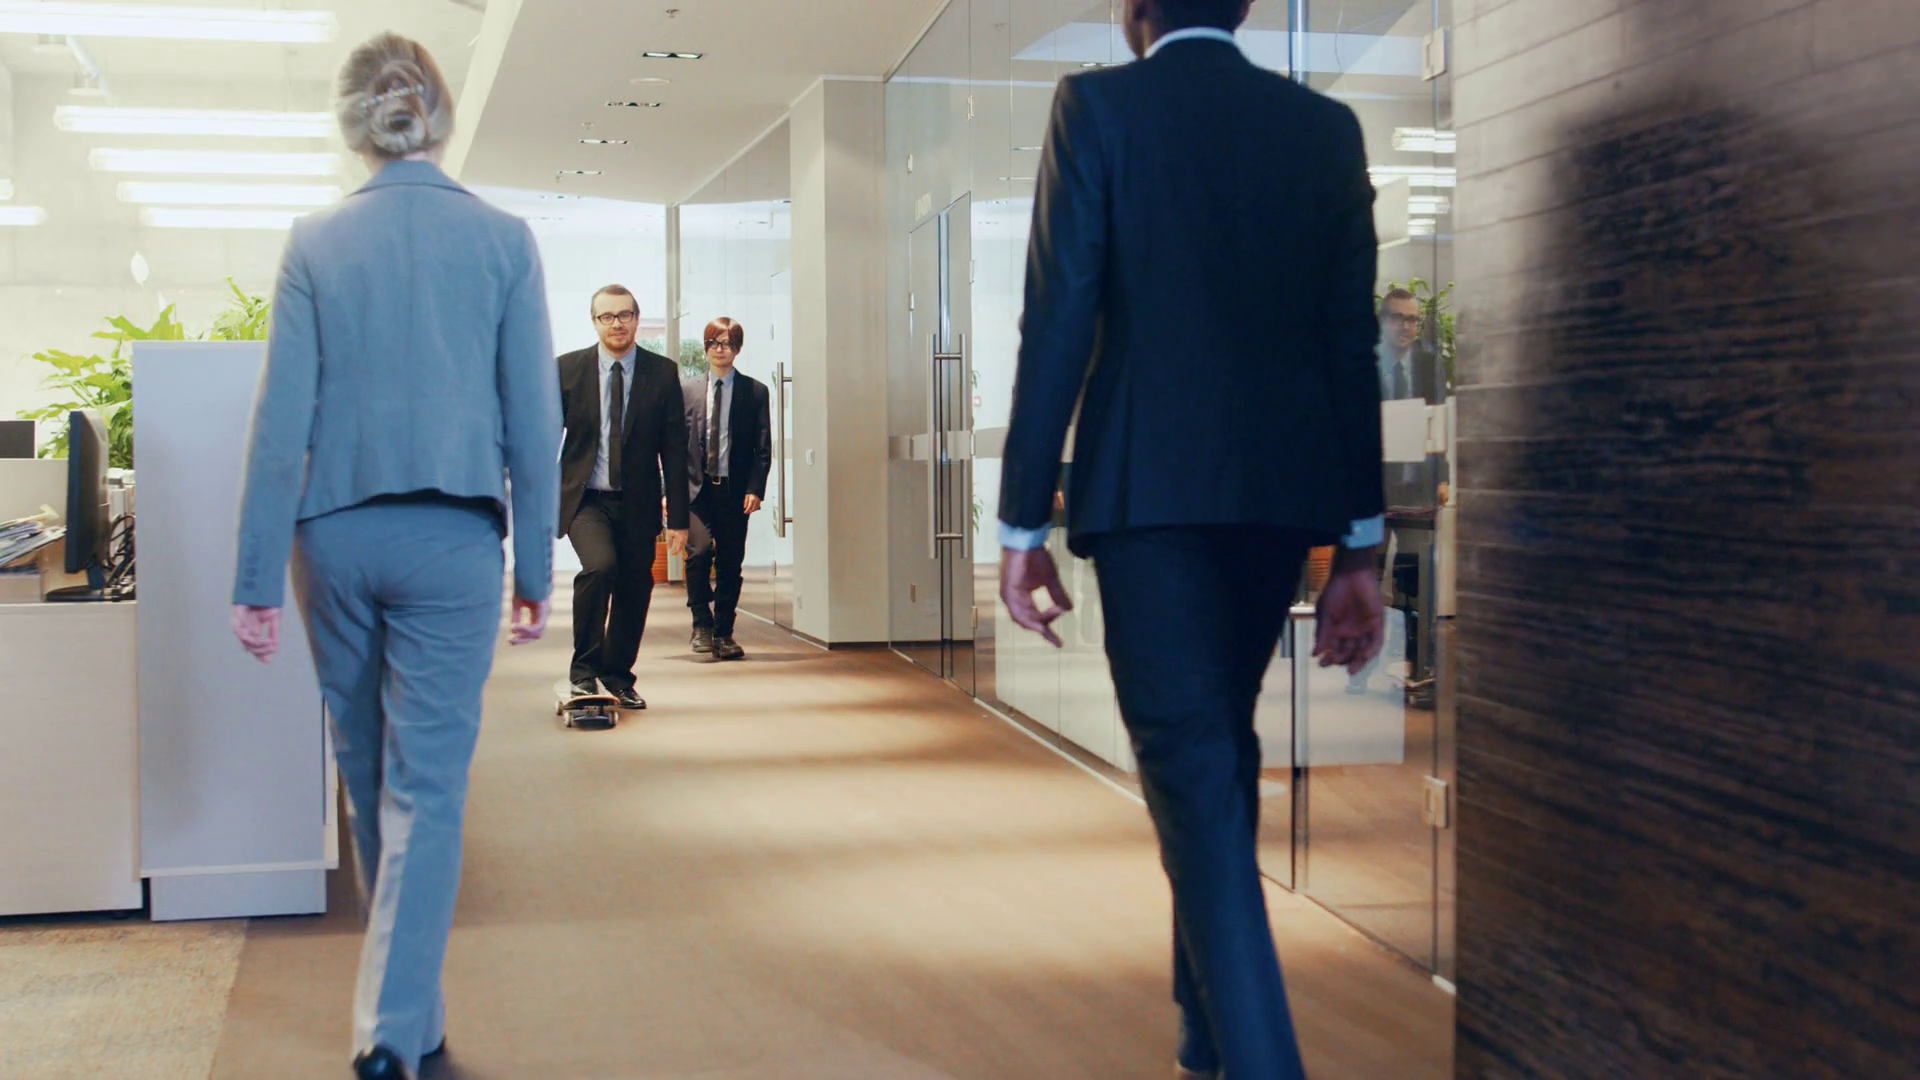 Stylish Suited Businessman Rides Skateboard Through the Corporate ...